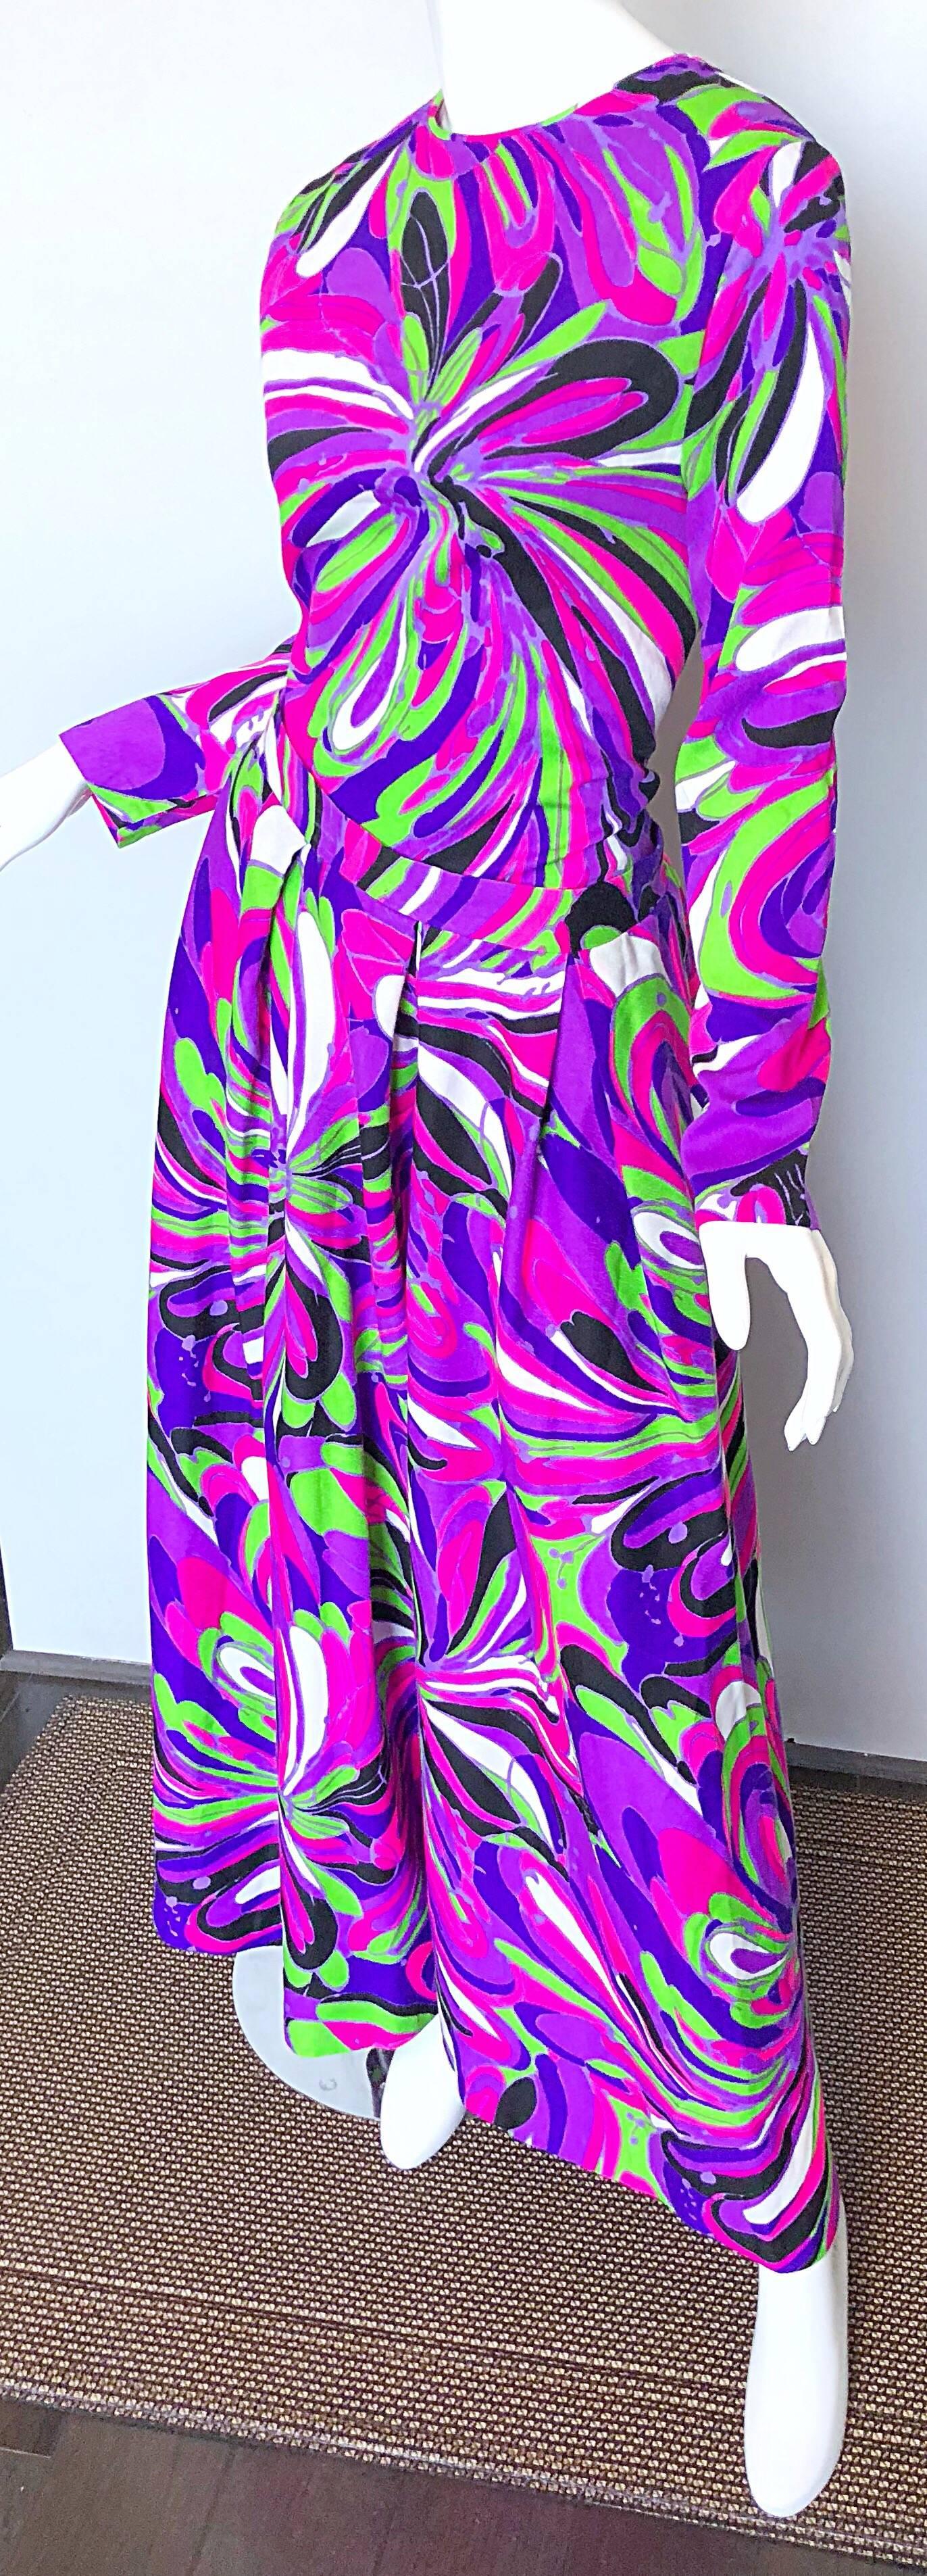 Amazing 1970s Bright Colorful Psychedelic Top + Wide Leg Palazzo Cropped Pants 4